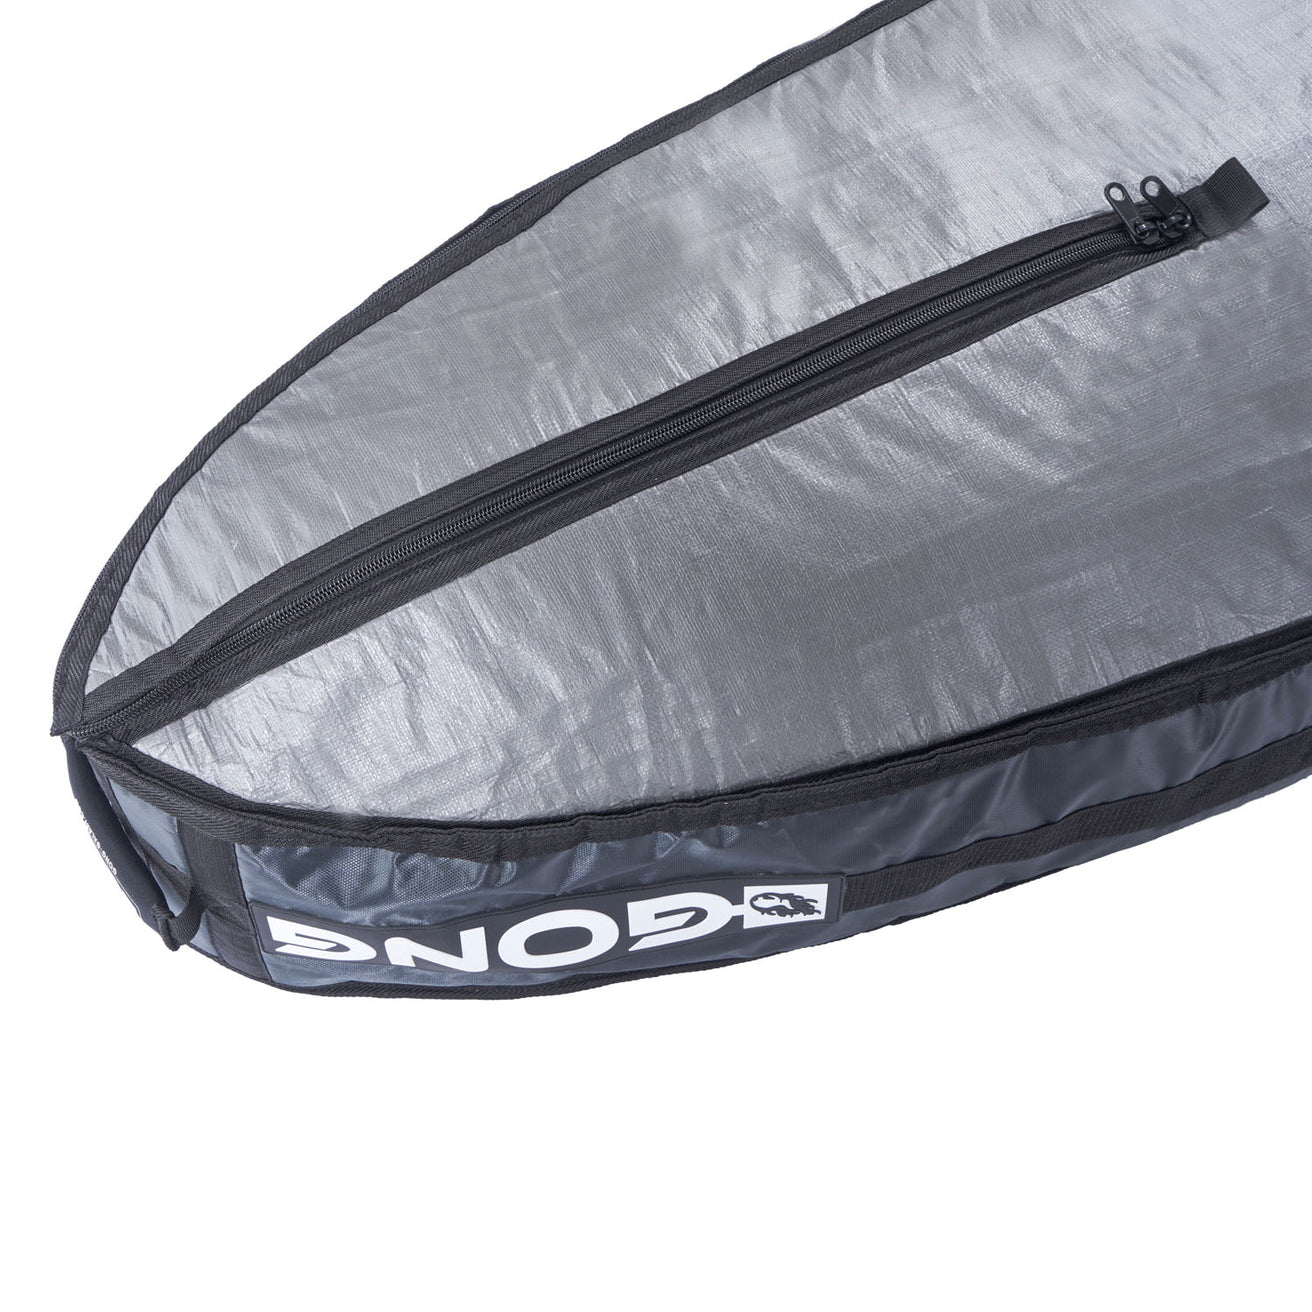 GONG | Wing Foil Luxe Bag Cruzader